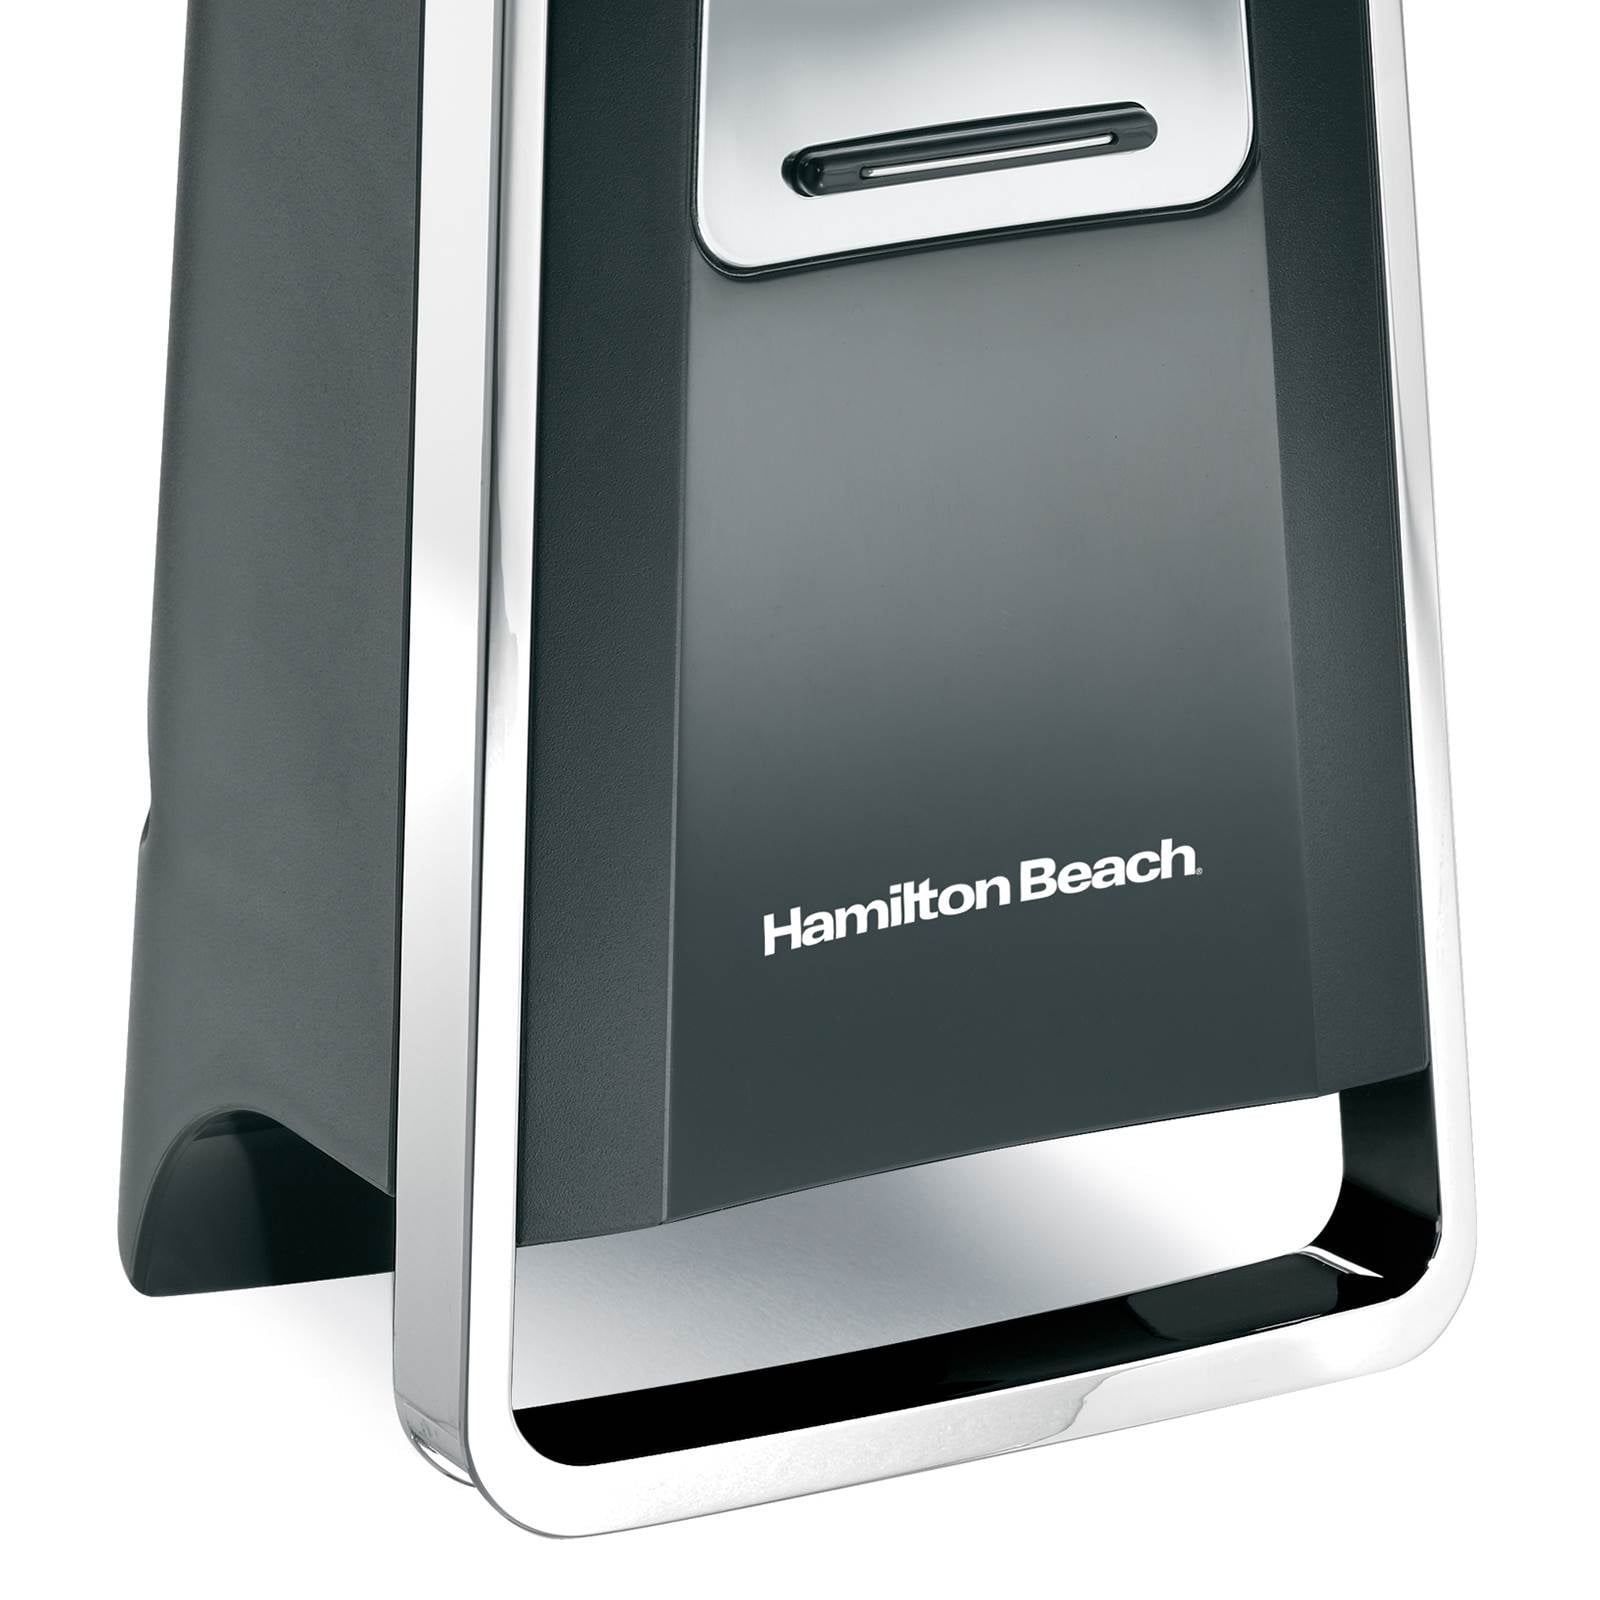 Hamilton Beach Smooth Touch Electric Automatic Can Opener, Black and Chrome  (76607) & 2 Slice Extra Wide Slot Toaster with Shade Selector, Toast